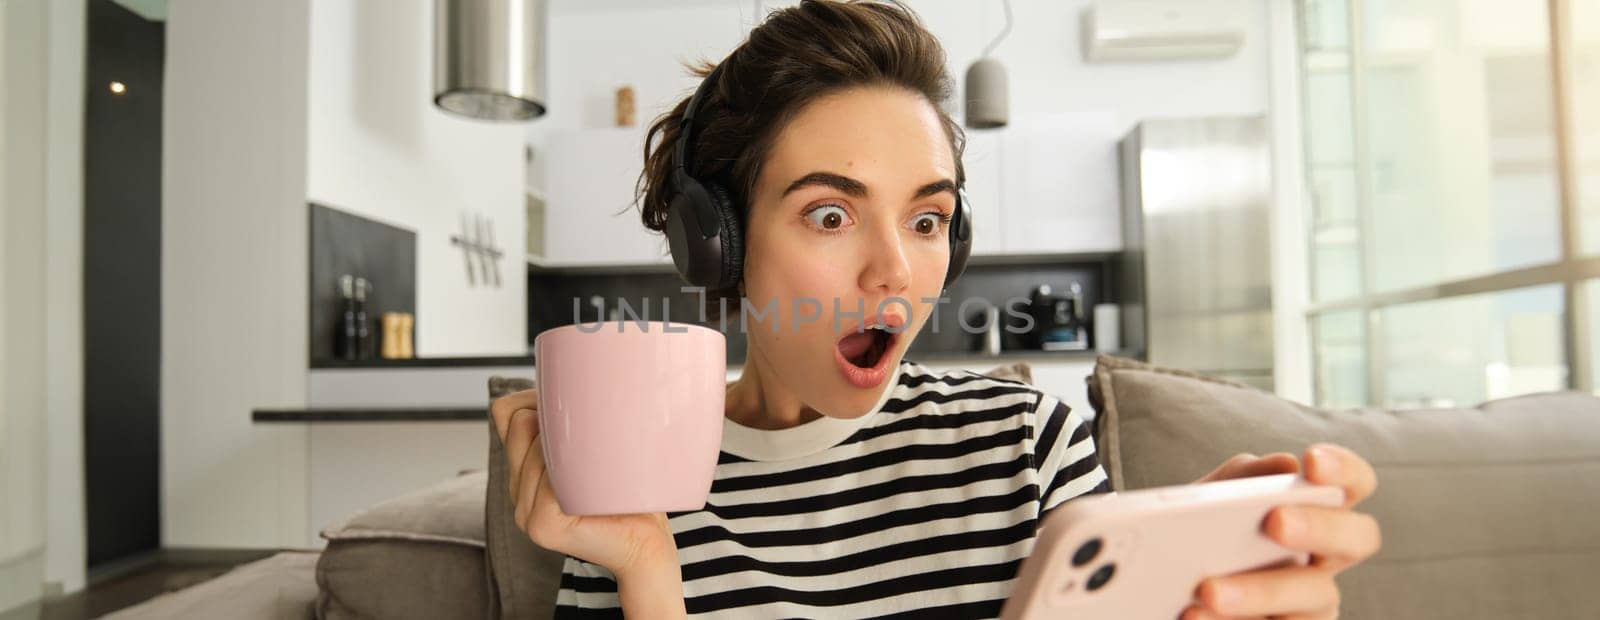 Portrait of woman binge watching her favourite tv show on smartphone, drinking tea and wearing headphones, gasping from shock, looking amazed at mobile screen.